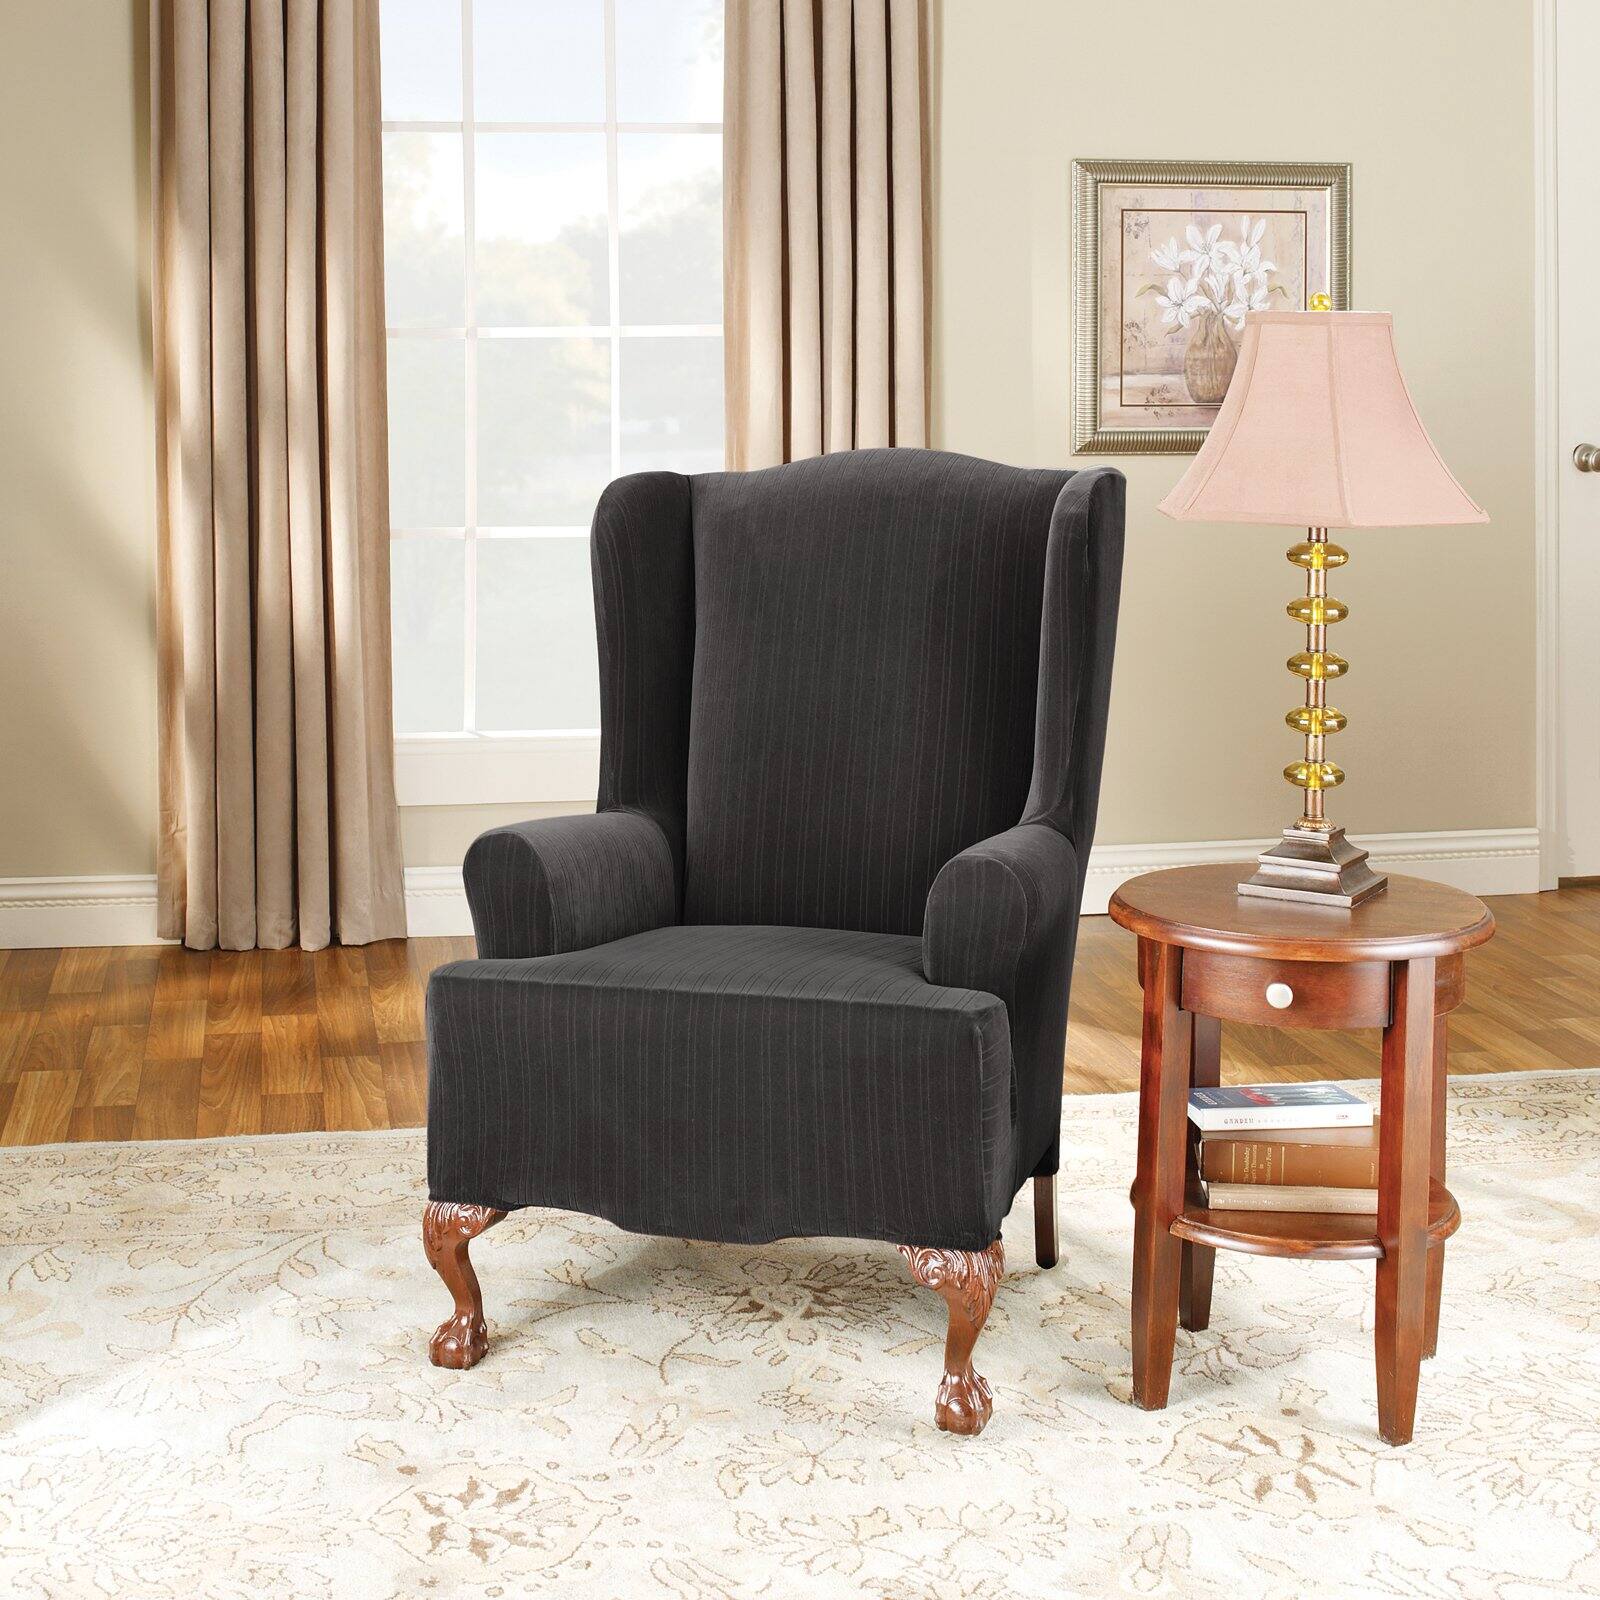 Surefit Stretch Pinstripe 2-Piece Wing Chair Slipcover, Black - image 1 of 2